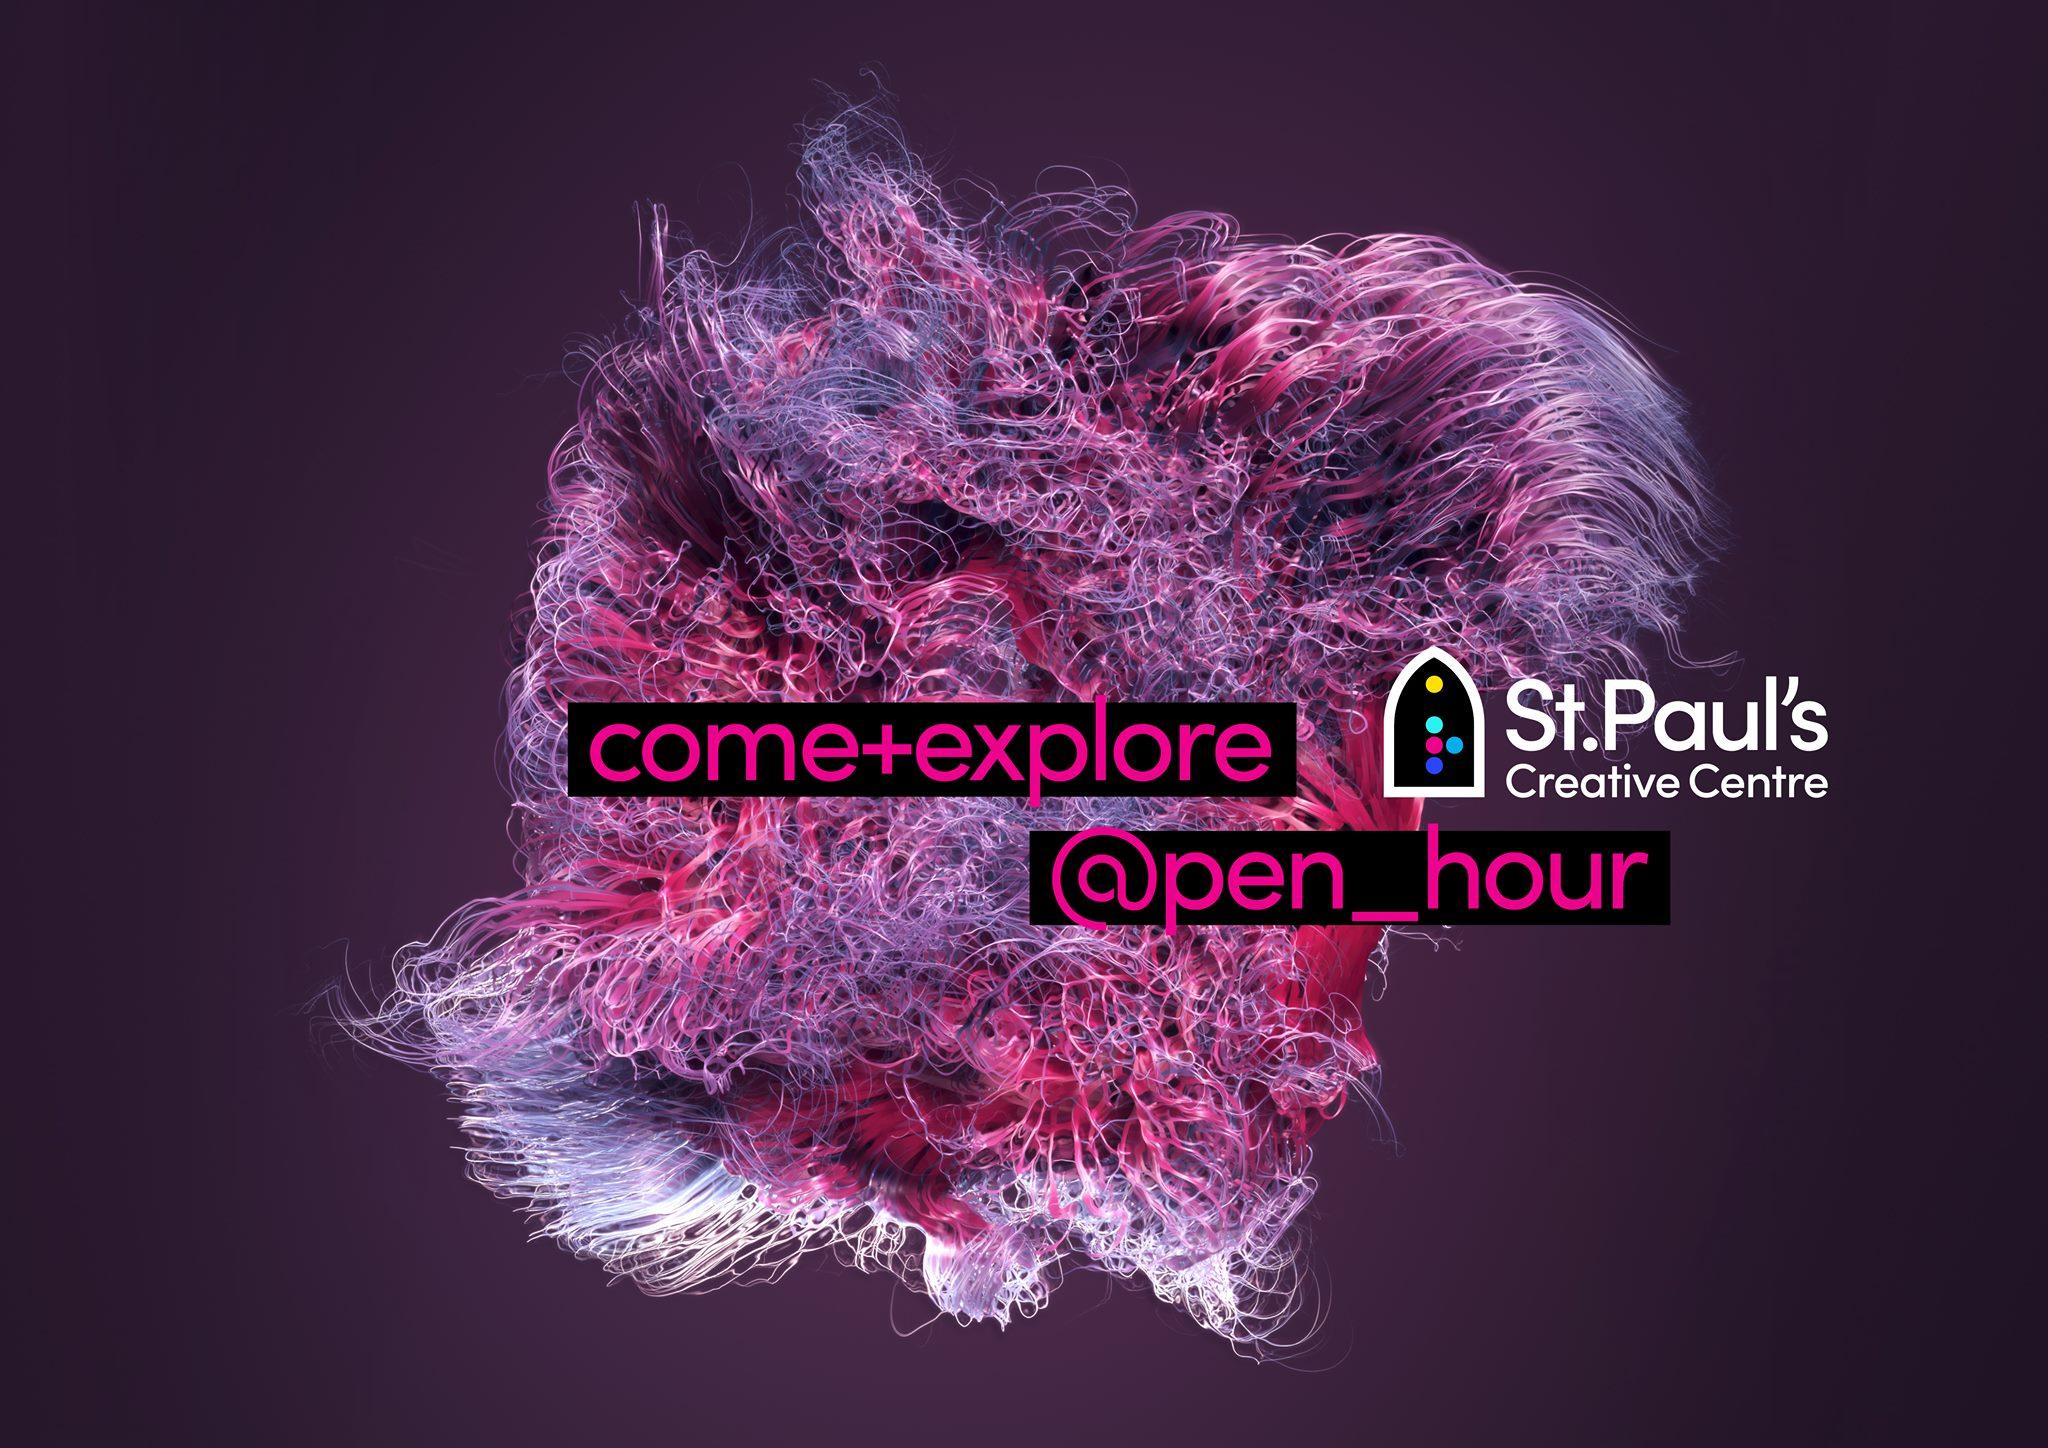 OPEN HOUR at St Paul's Creative Centre